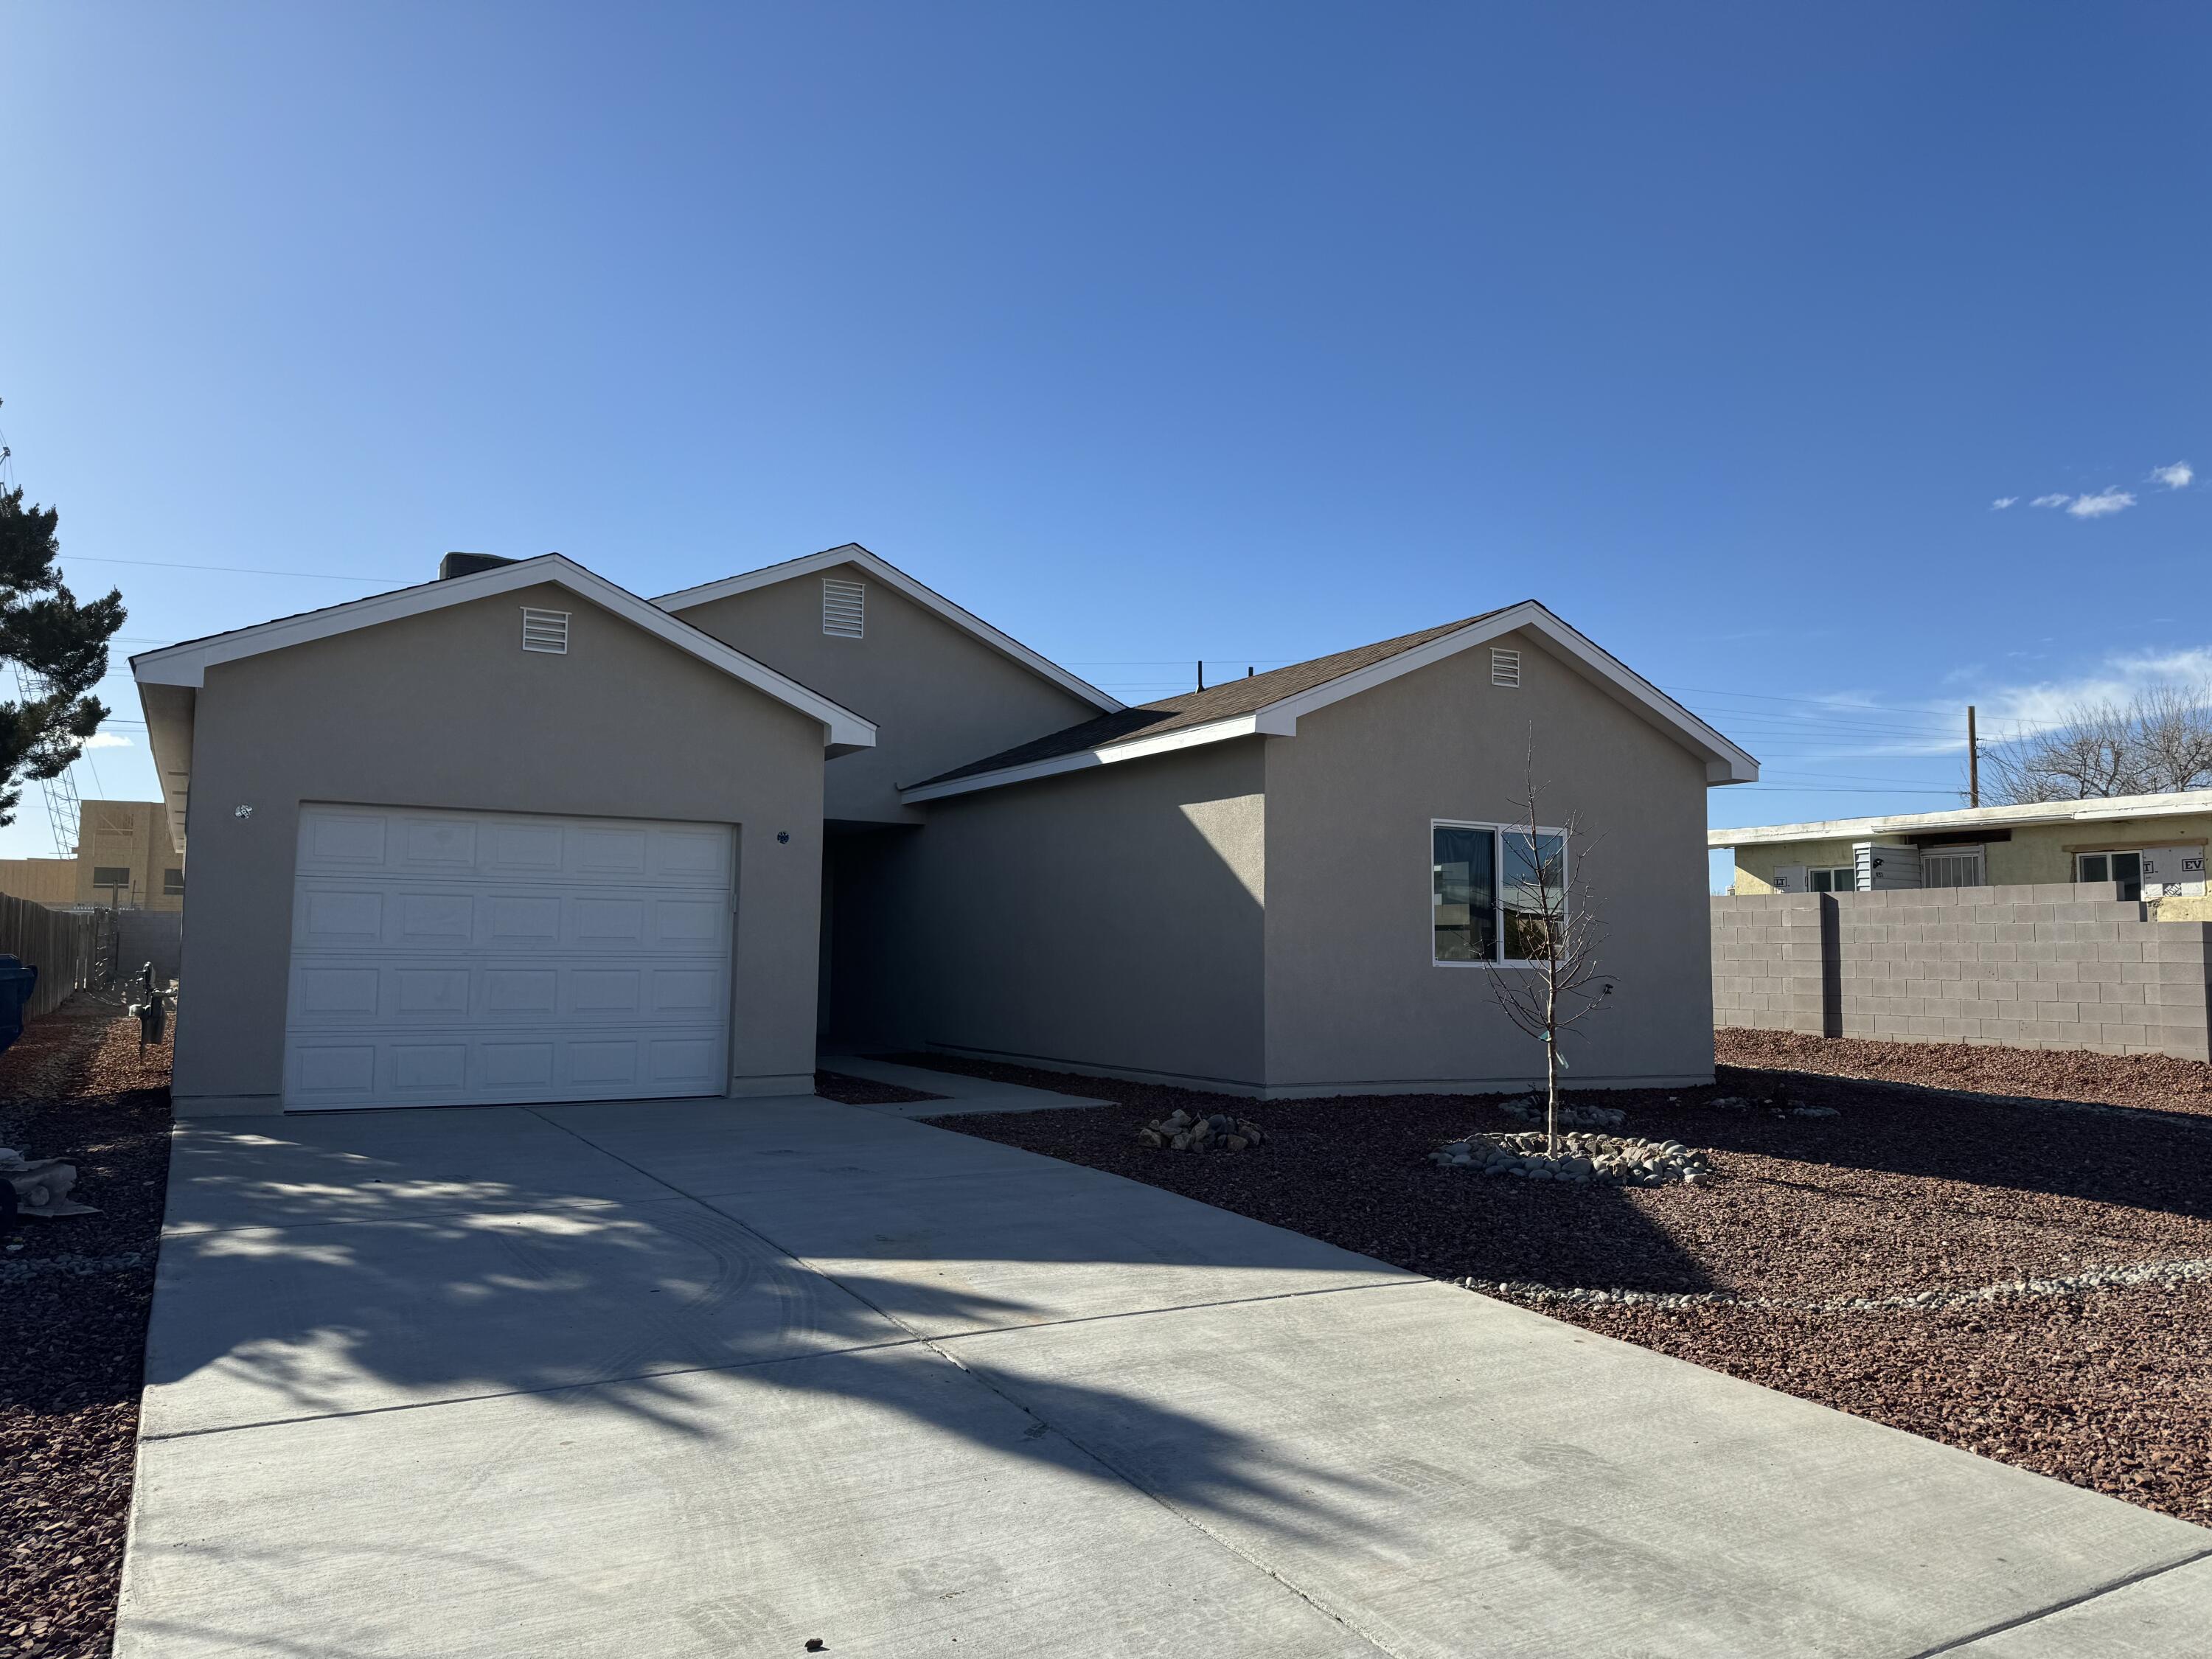 451 63rd Street NW, Albuquerque, New Mexico 87105, 3 Bedrooms Bedrooms, ,2 BathroomsBathrooms,Residential,For Sale,451 63rd Street NW,1044938